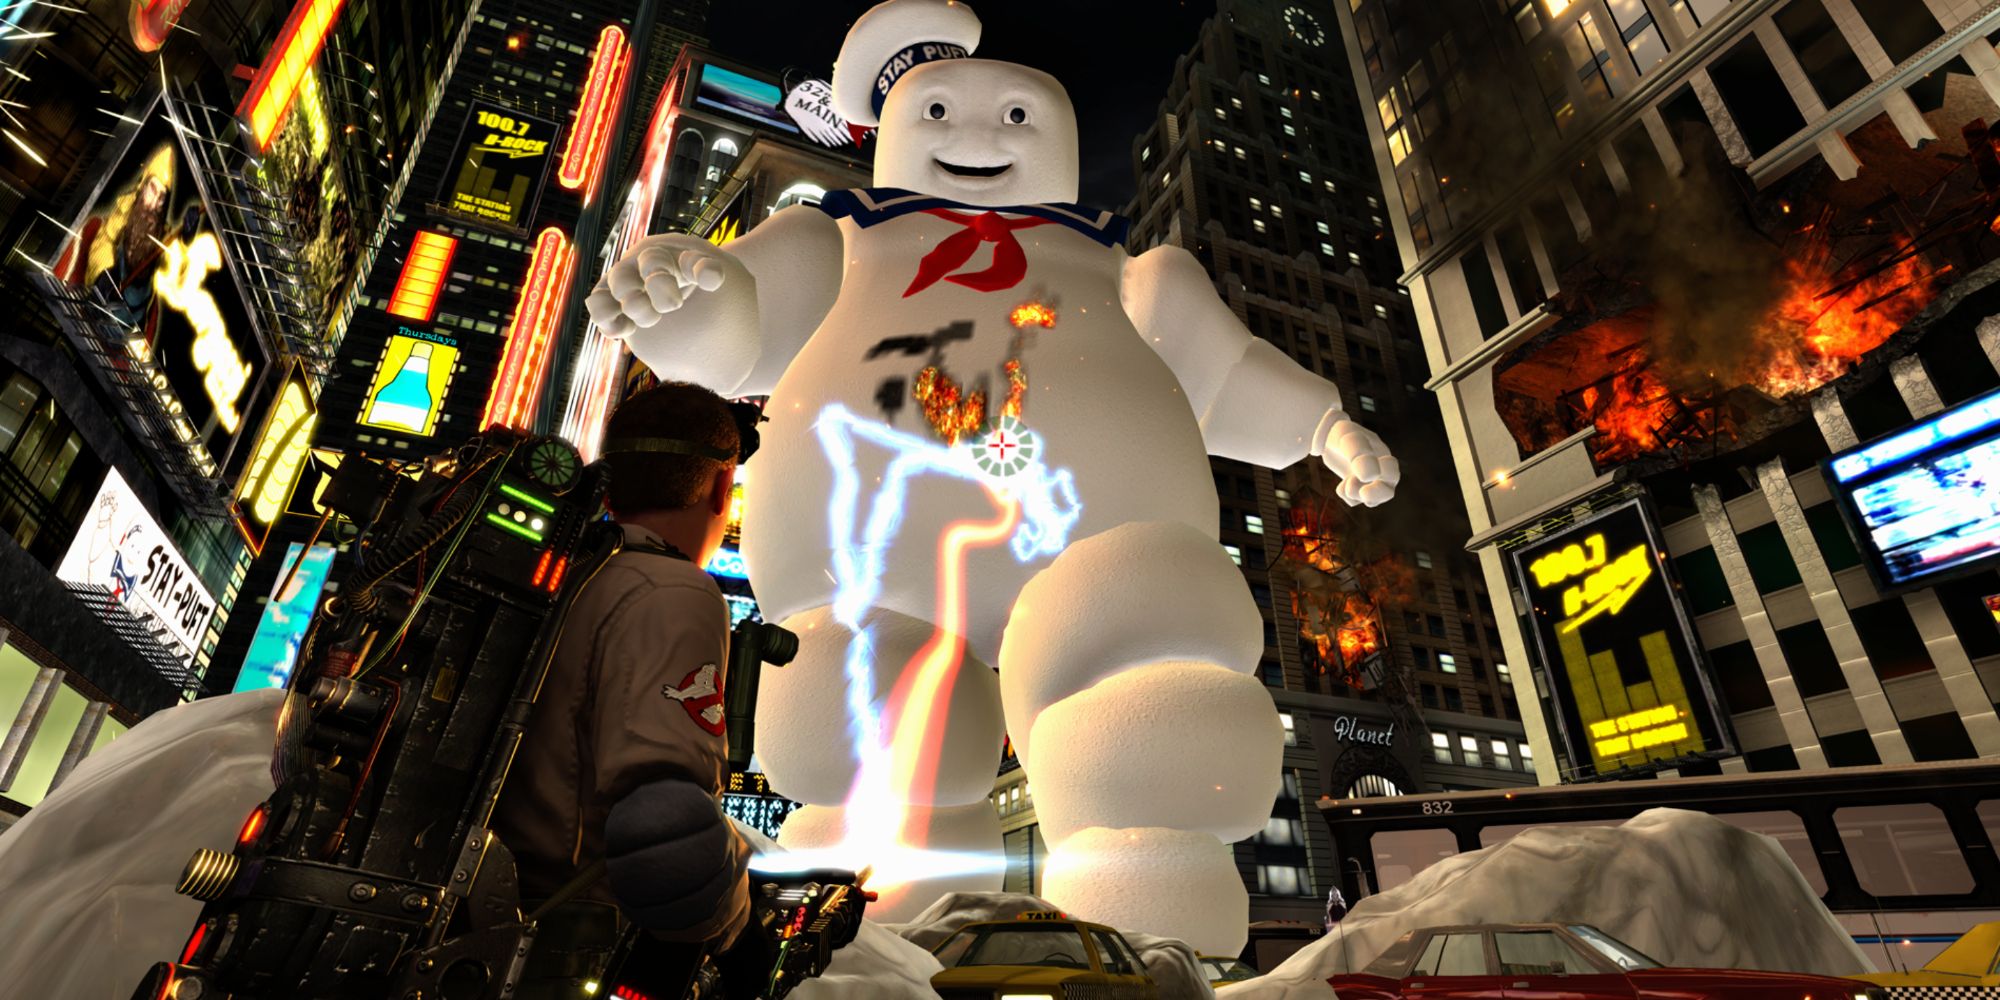 The Rookie using a proton beam while fighting against the Marshmallow Man in Ghostbusters The Video Game